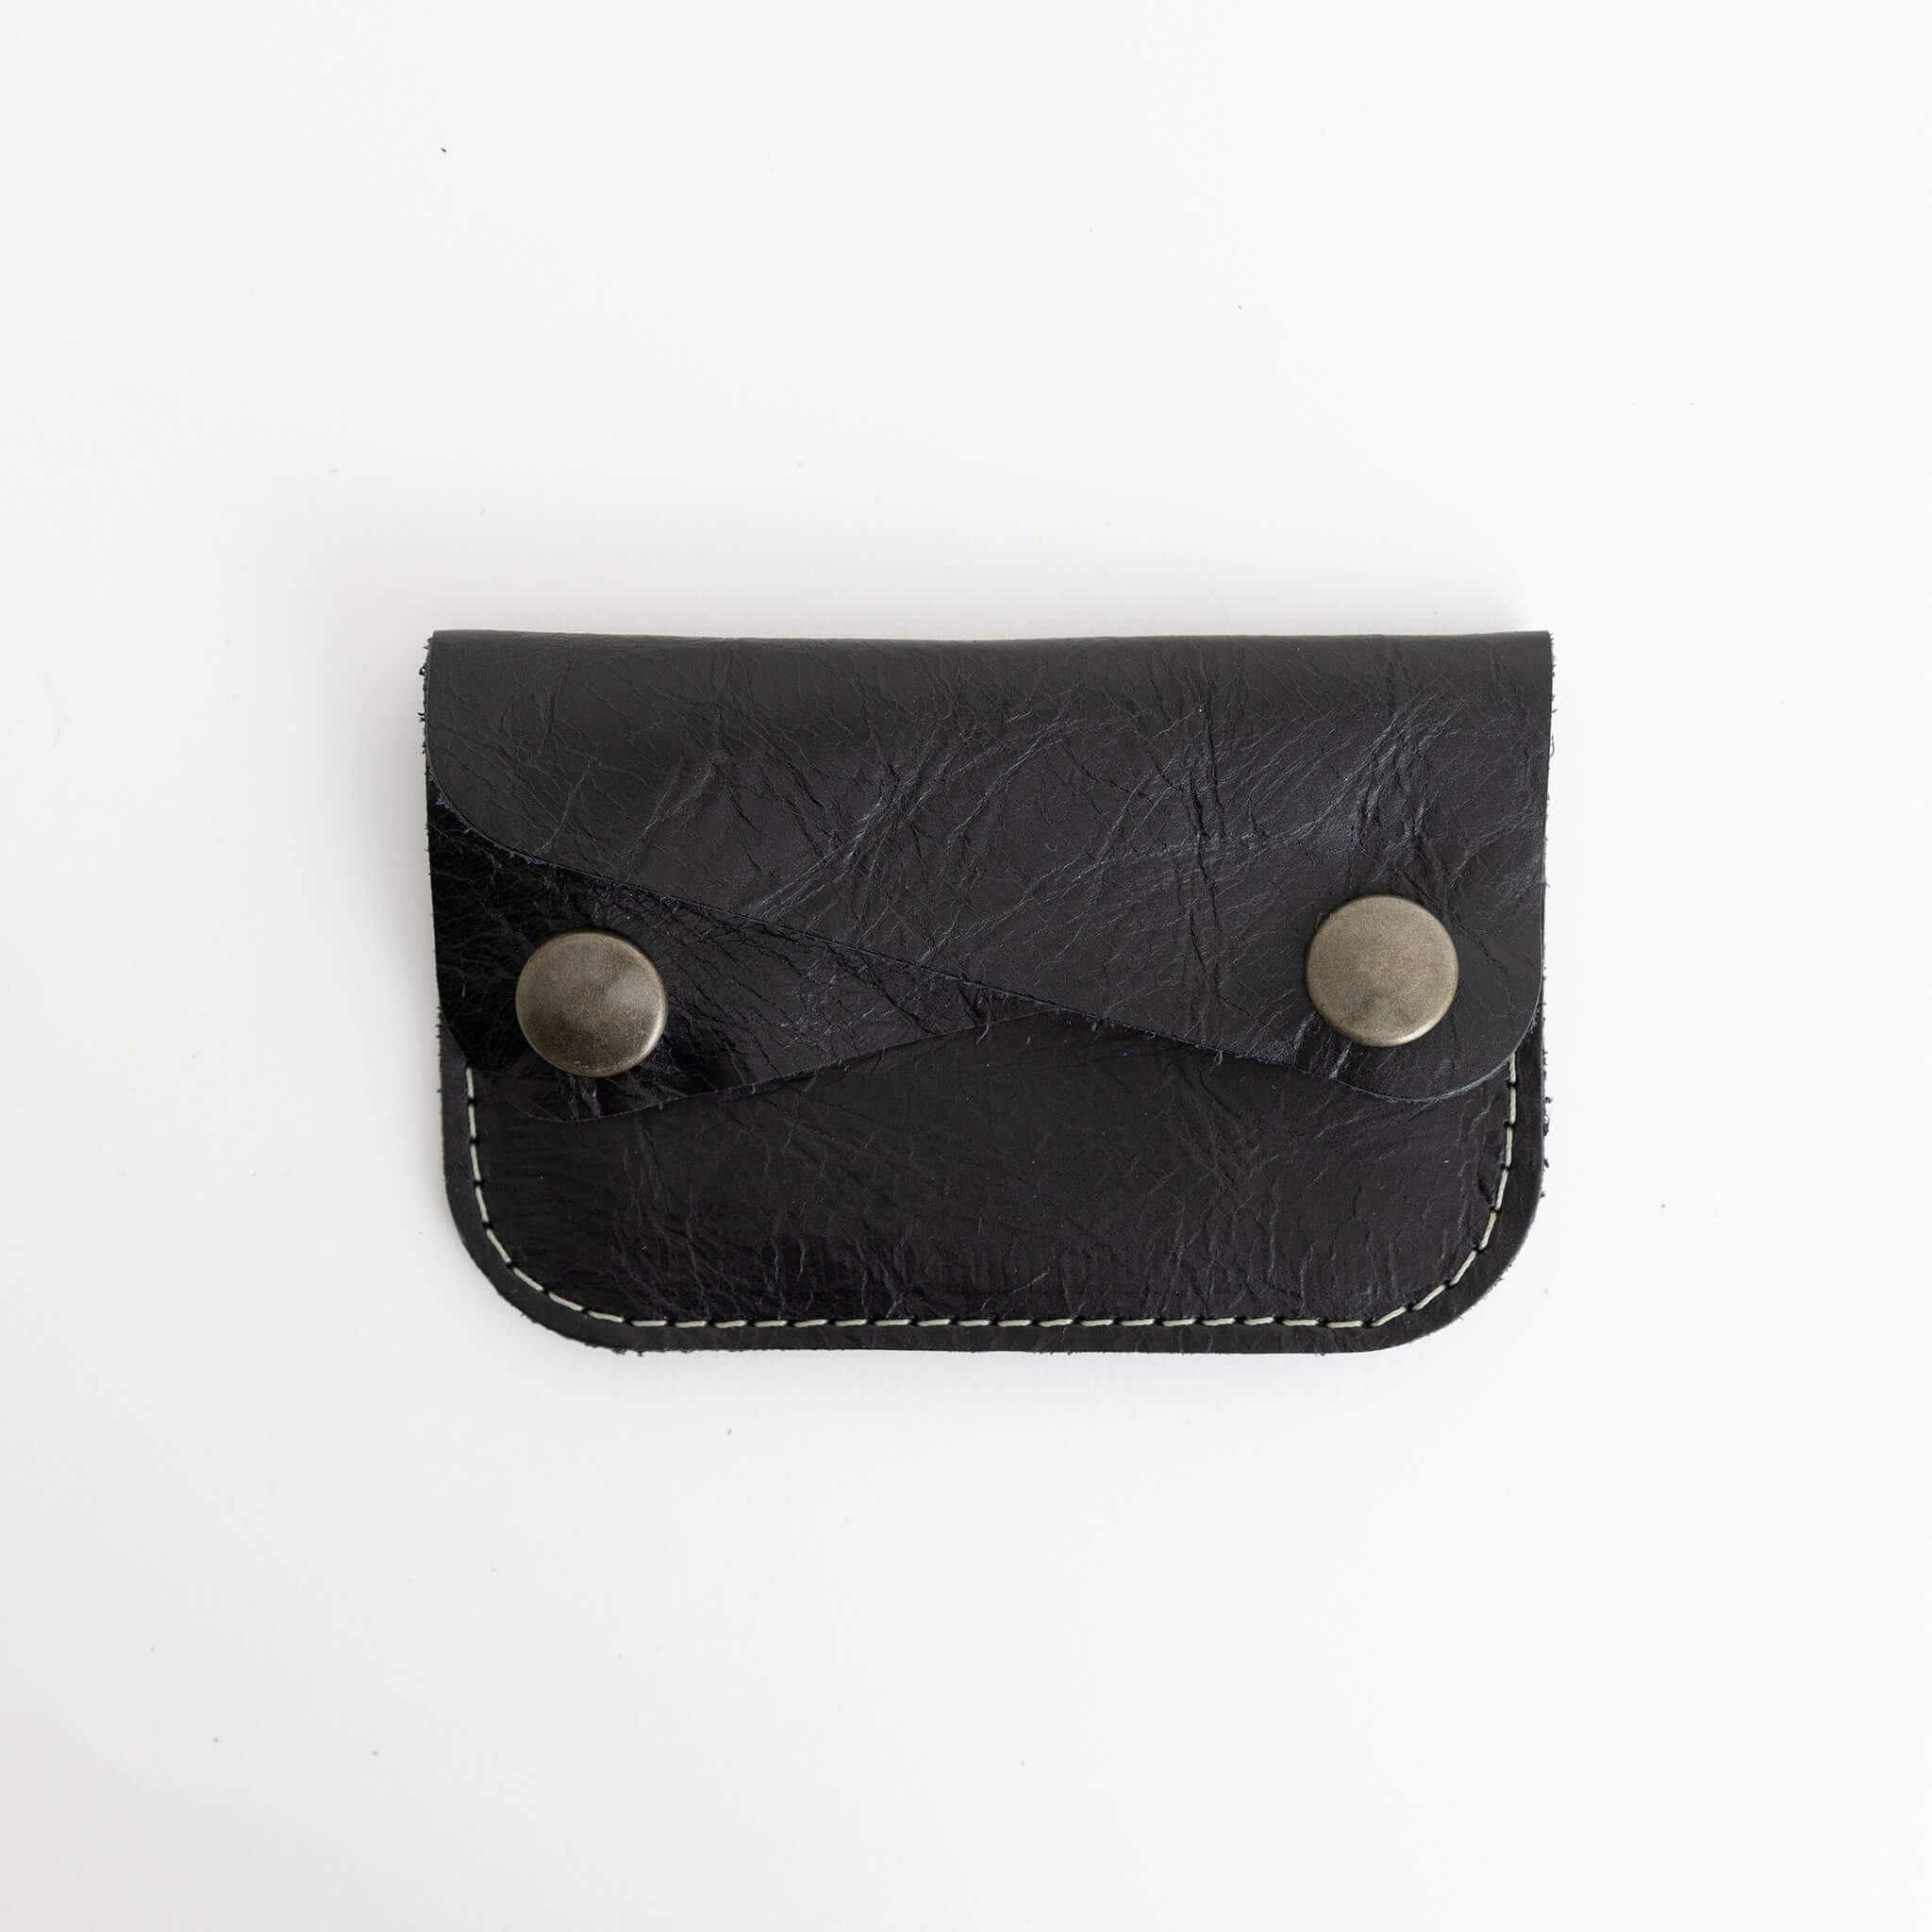 Azul- Leather Coin Purse by Marshé - Dead People's Stuff 